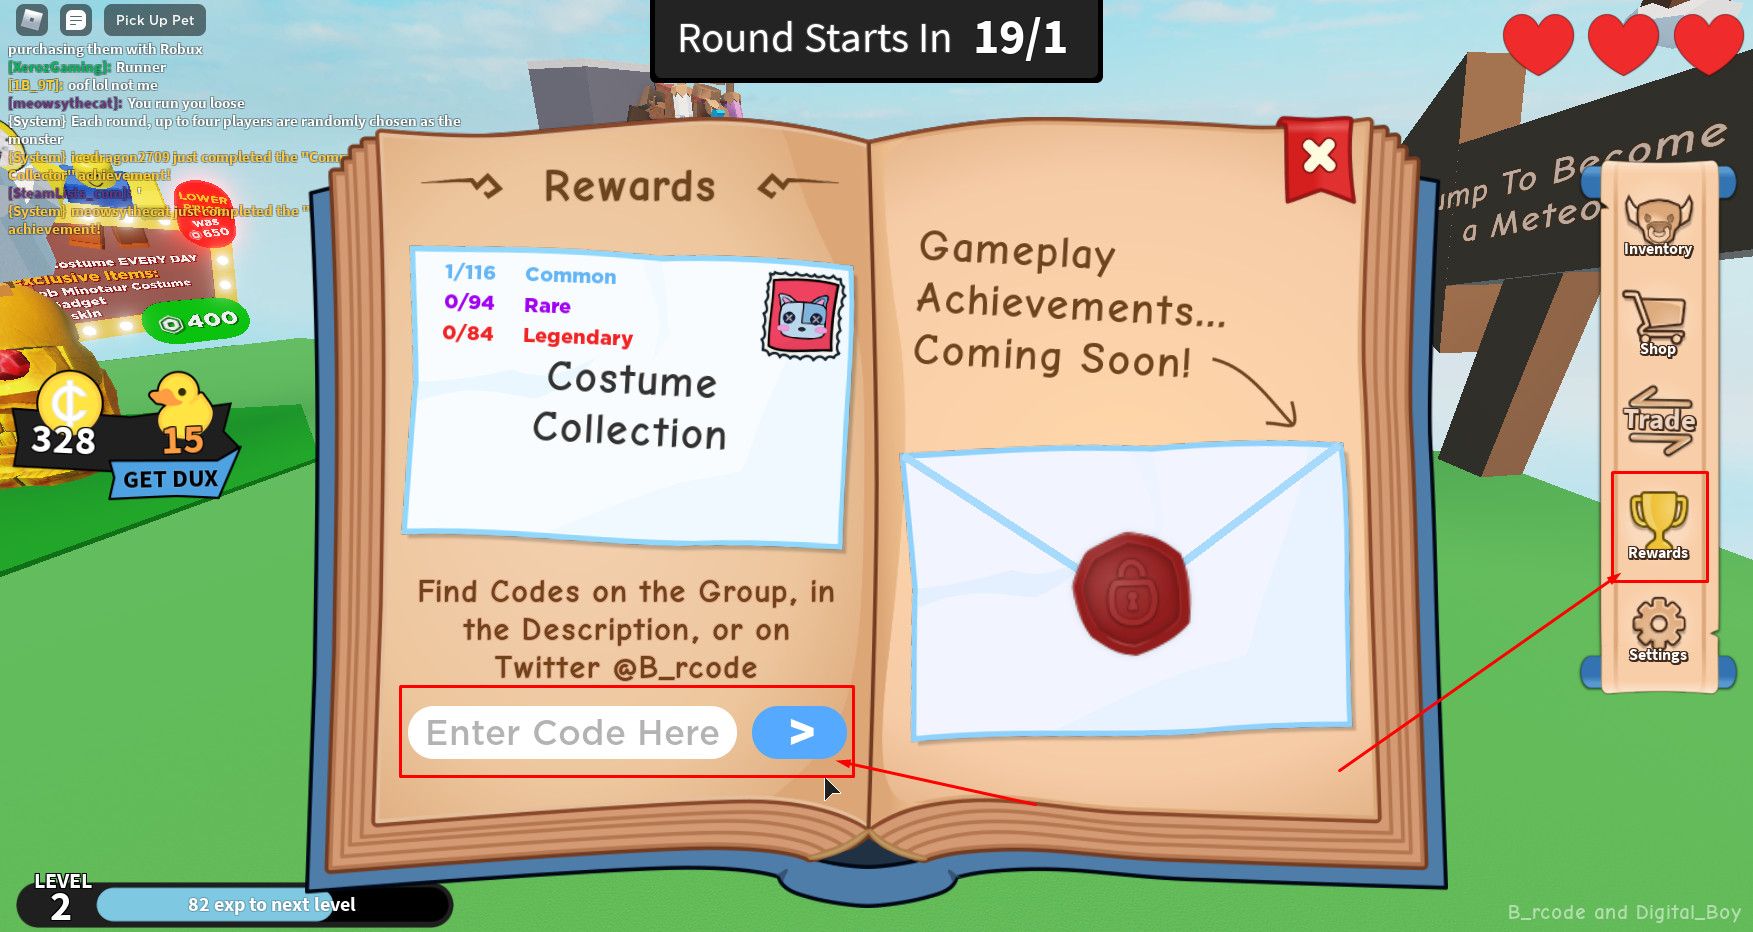 Roblox Book Of Monsters Codes Free Dux Coins And Xp July 2021 Steam Lists - roblox costume codes